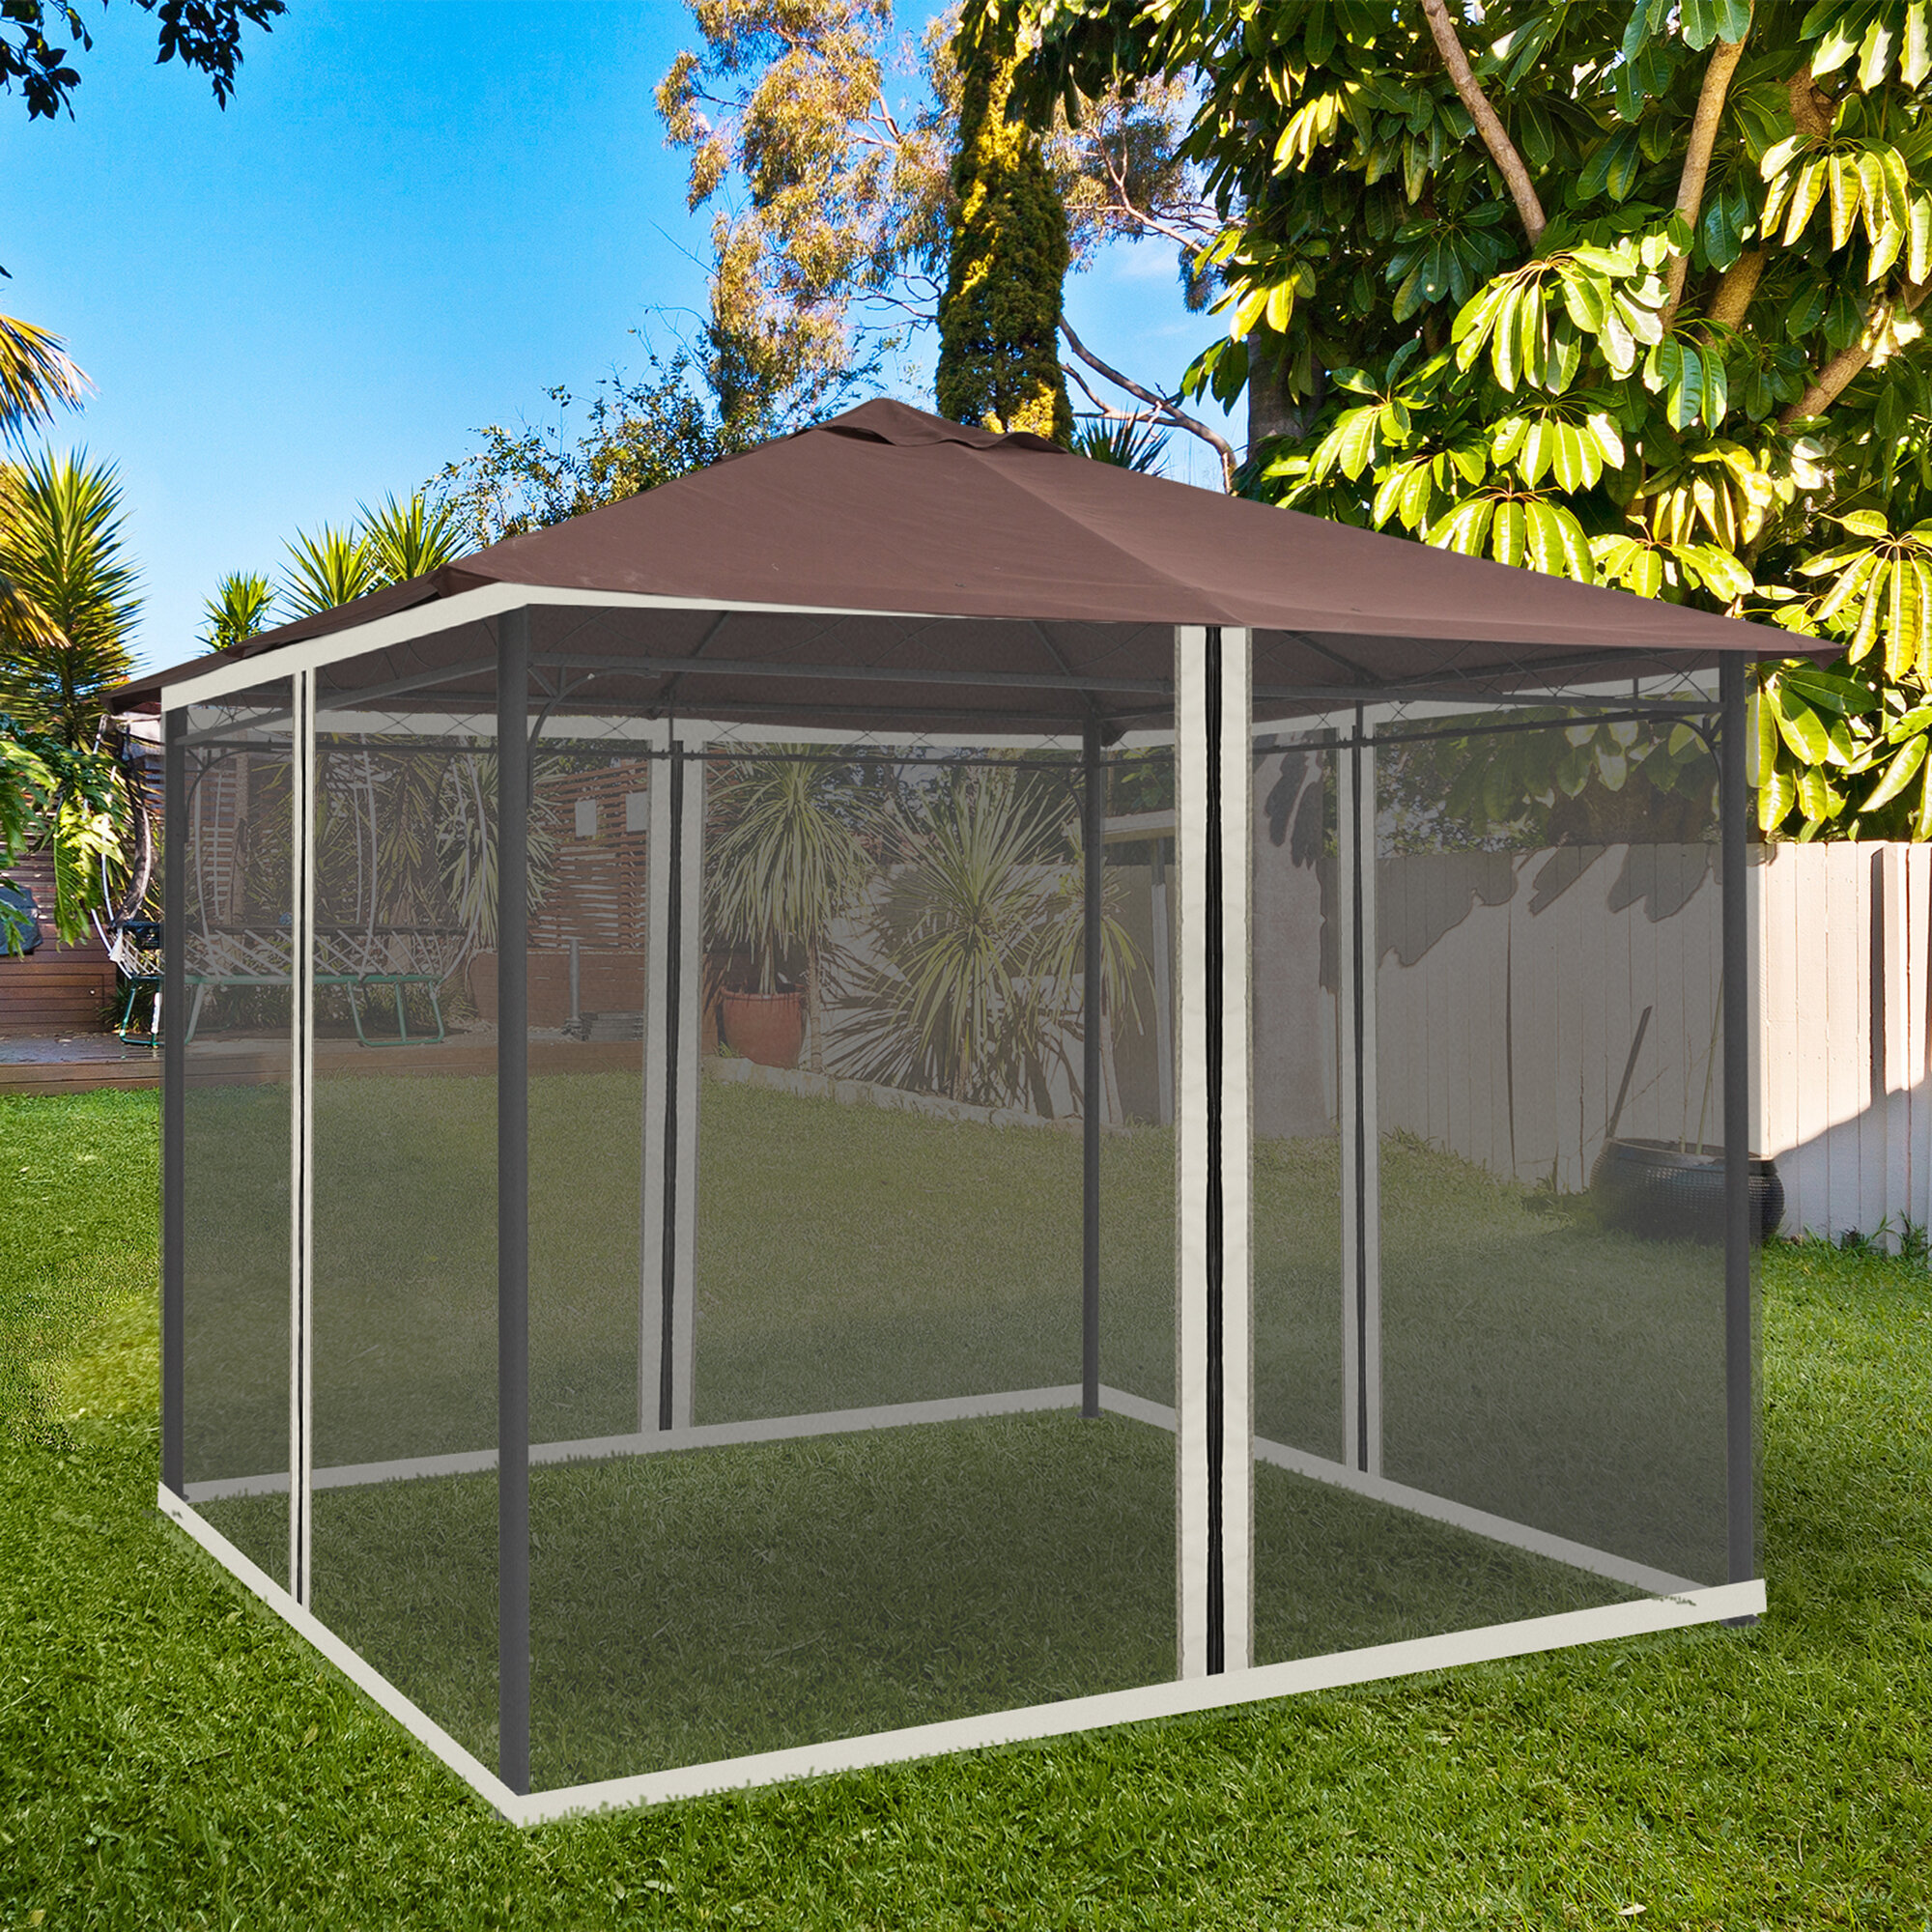 SunJoy Gazebo 10x12 Replacement Mosquito Netting for Windsor Oakmont for sale online